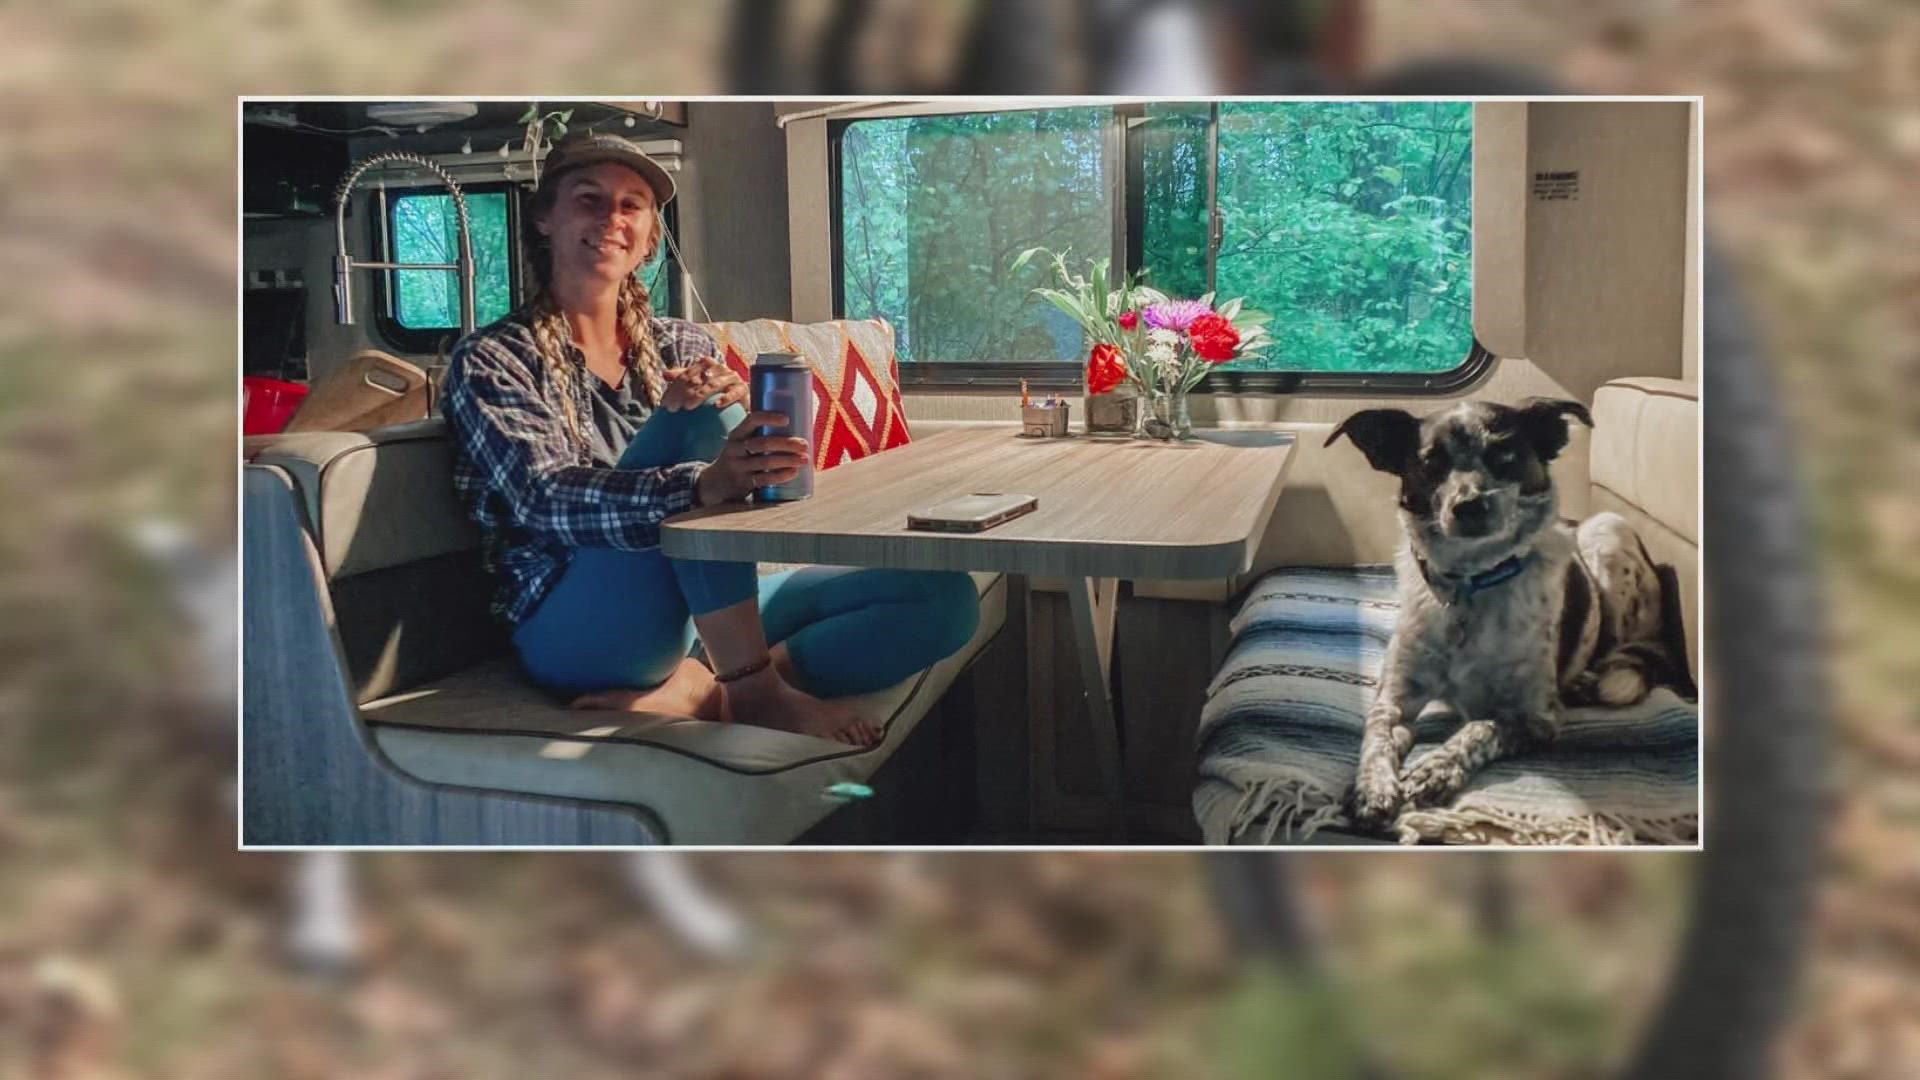 Paige Lackey, along with her dog, Willow, recently wrapped up a 5-month excursion throughout Michigan gathering information about rustic campgrounds.